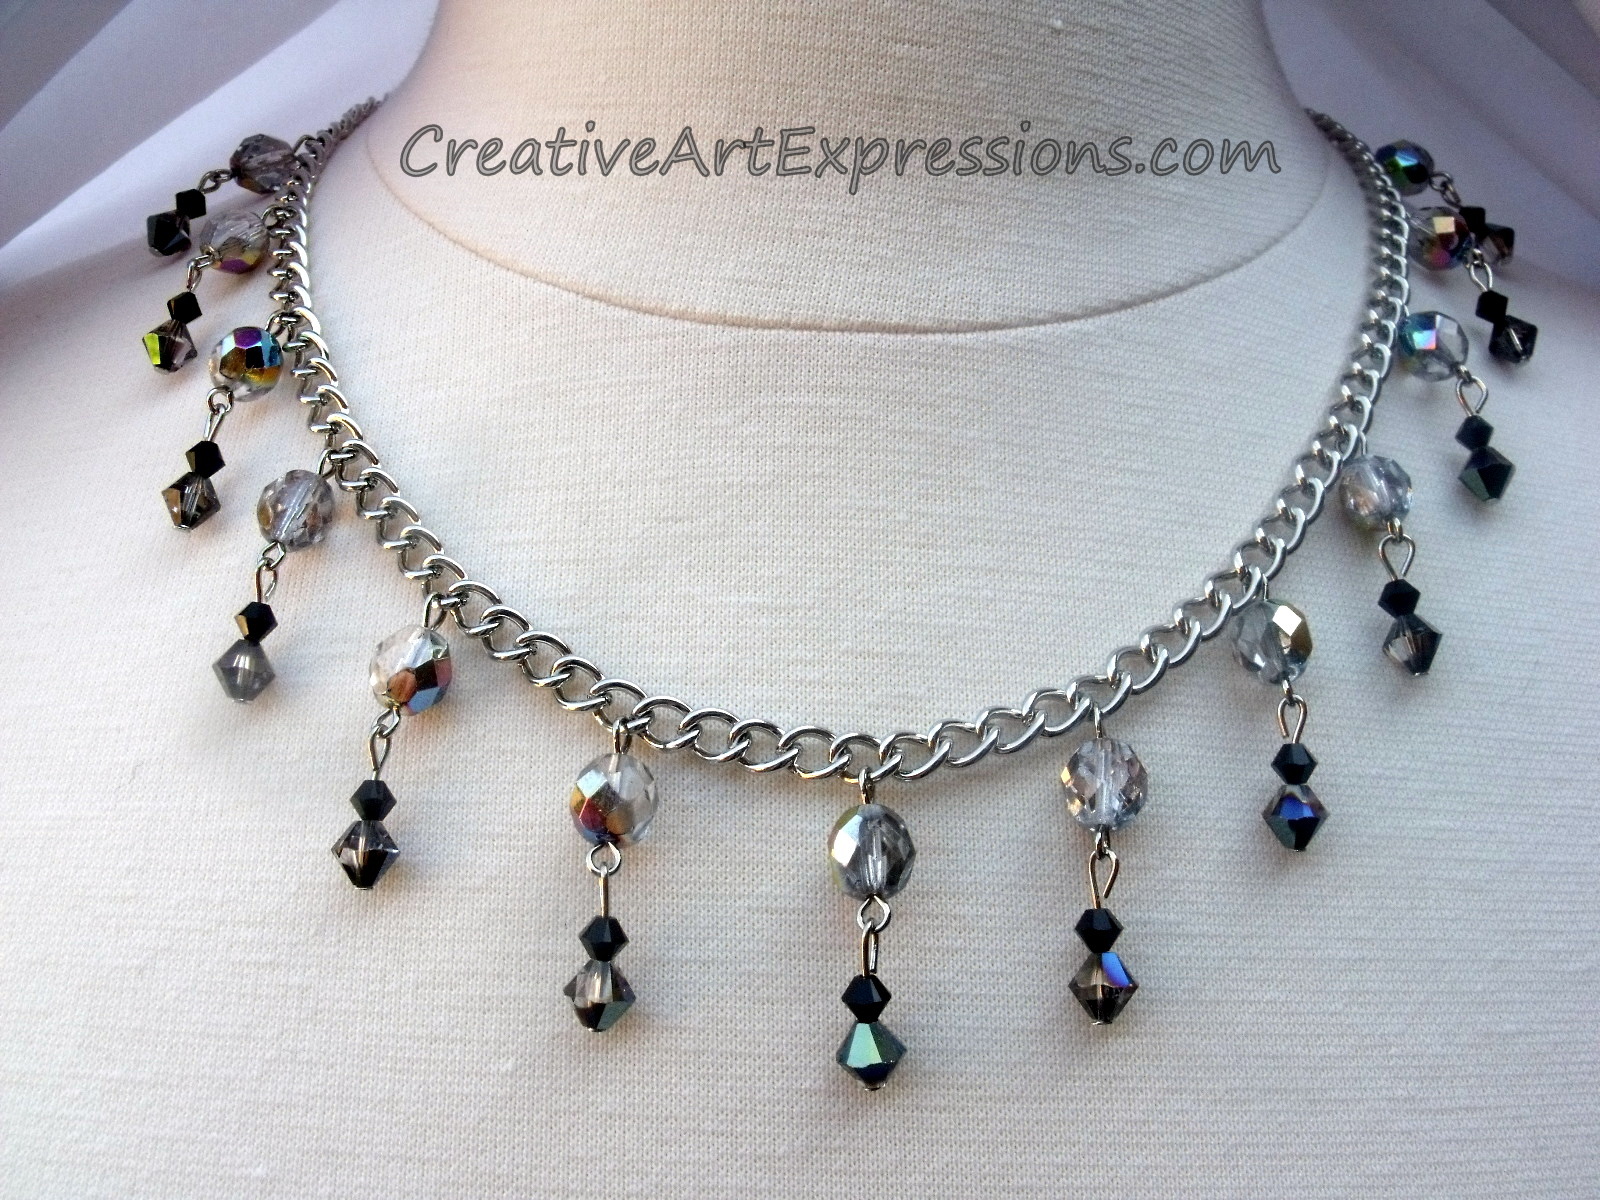 Creative Art Expressions Black & Silver Crystal Necklace & Earring Set Jewelry Design